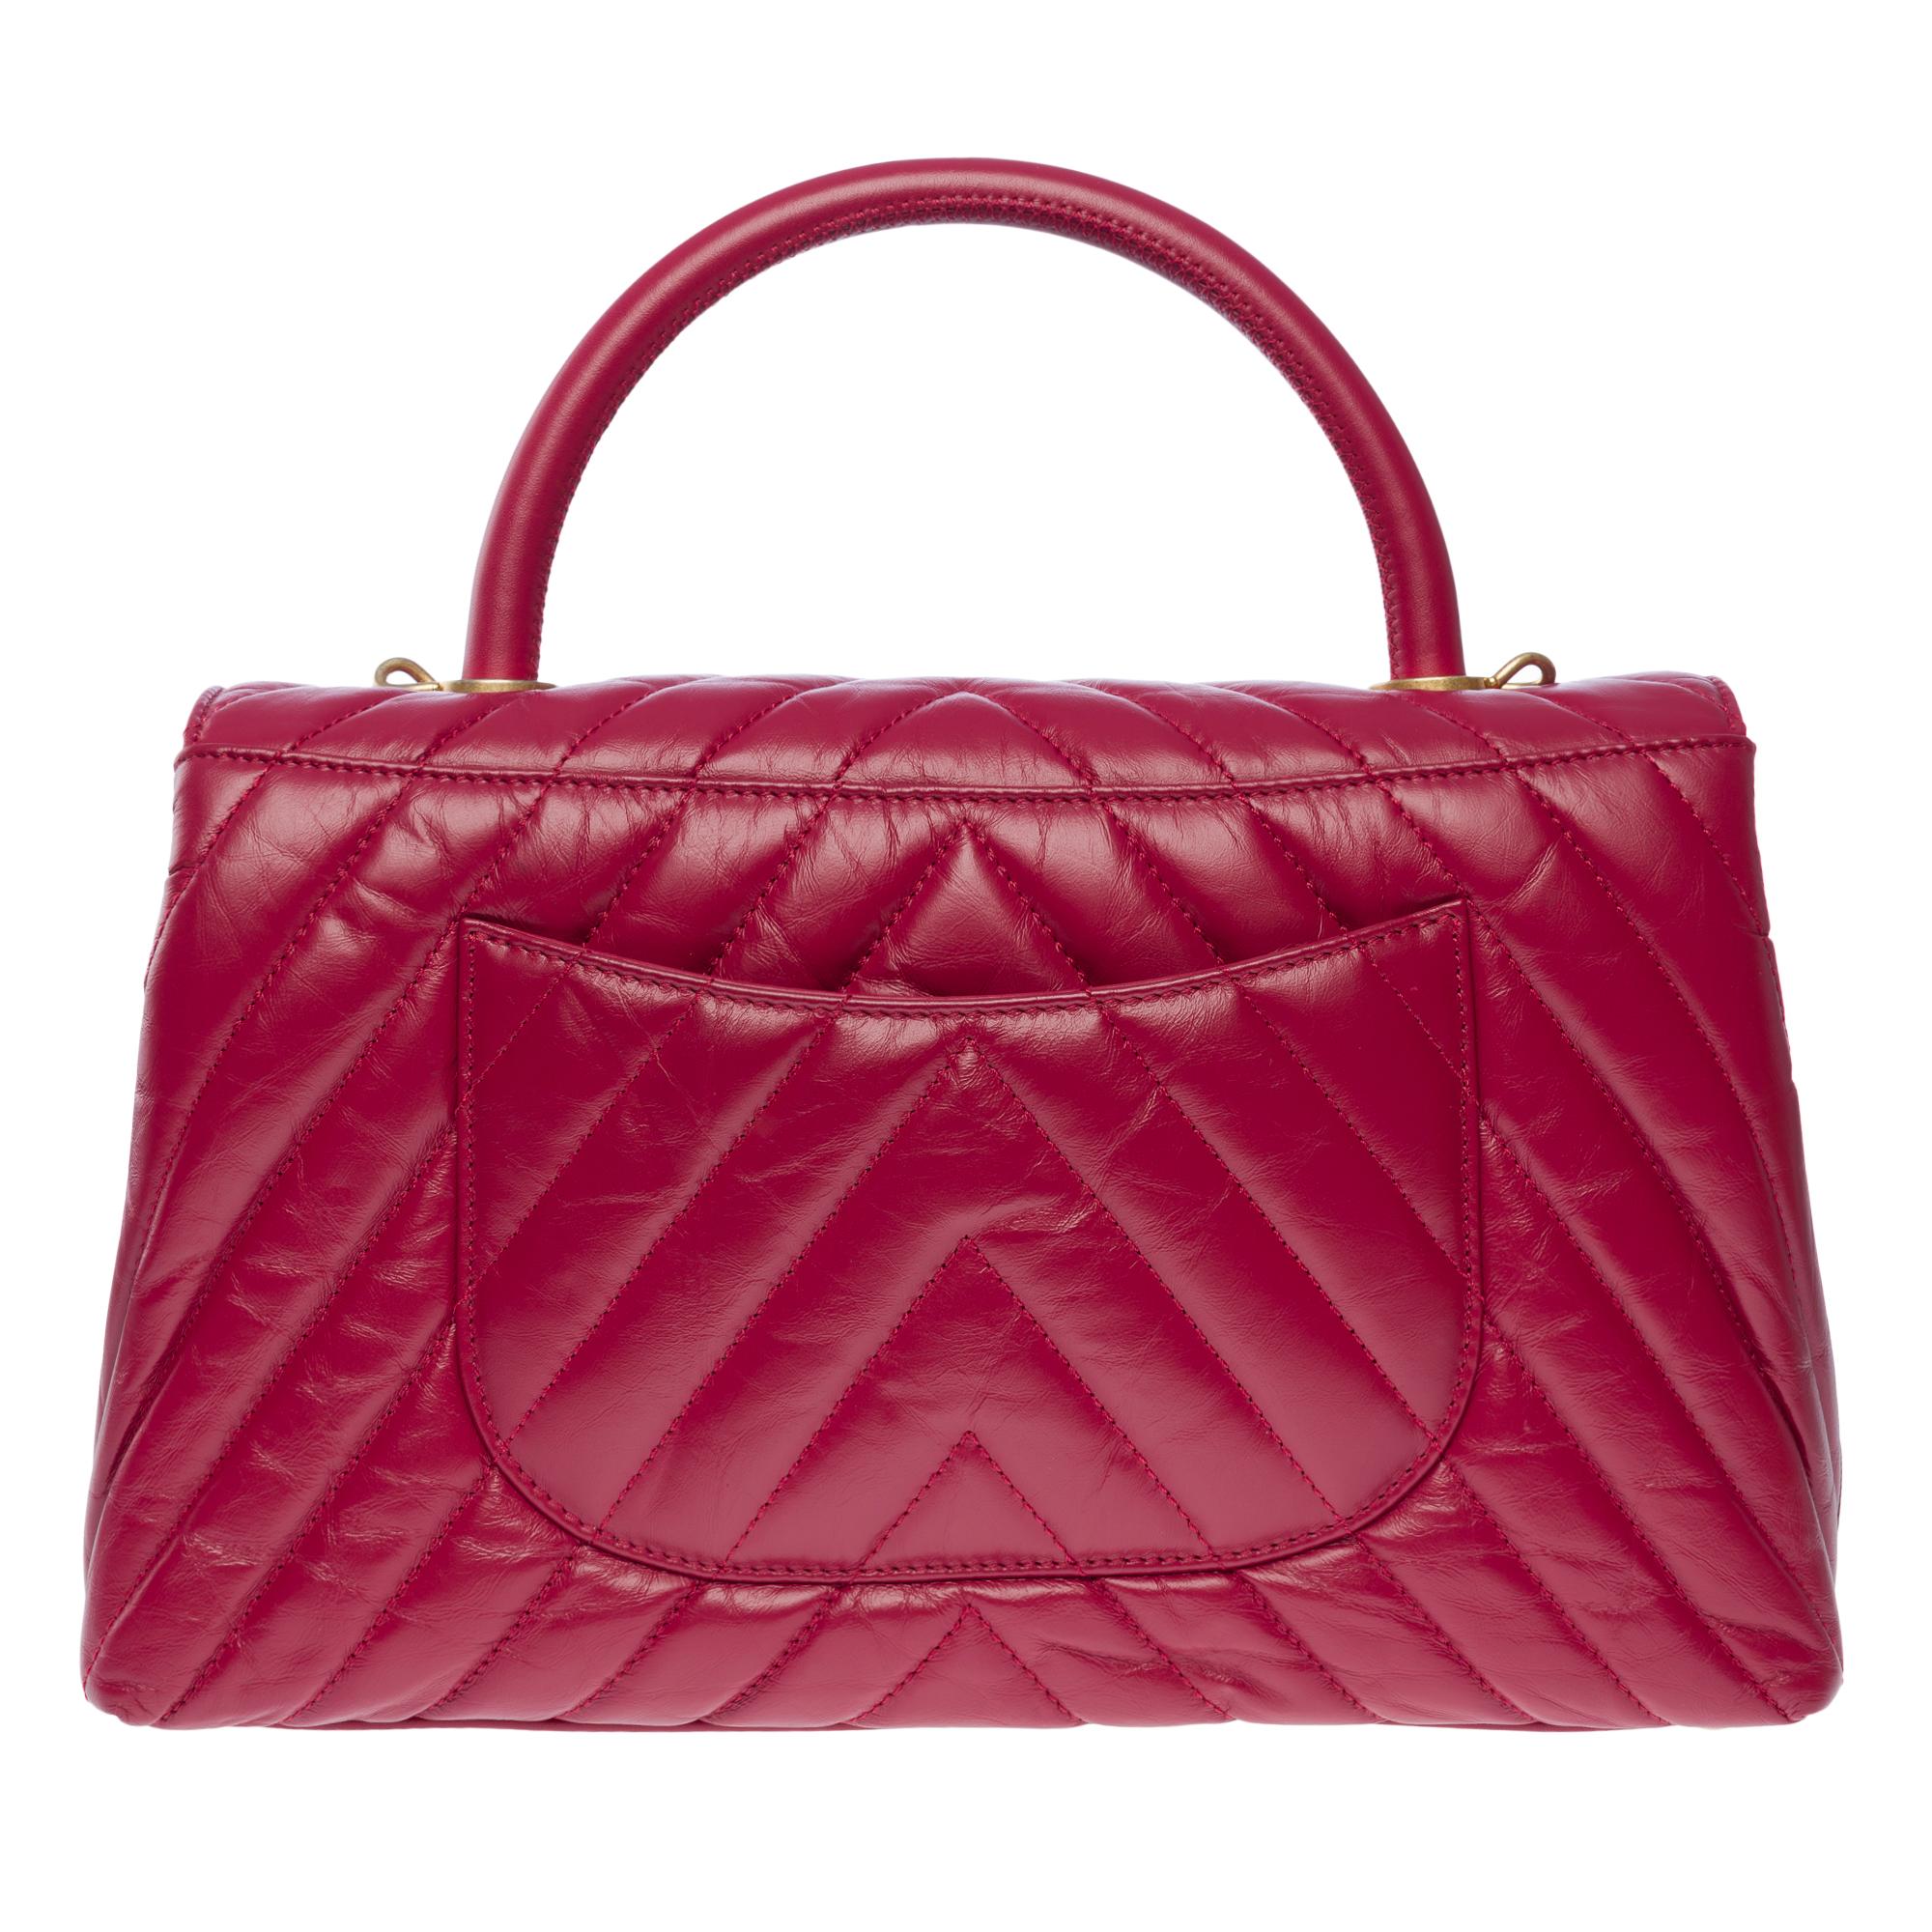 Amazing Chanel Coco handle handbag in Red lambskin leather, MGHW In Excellent Condition For Sale In Paris, IDF